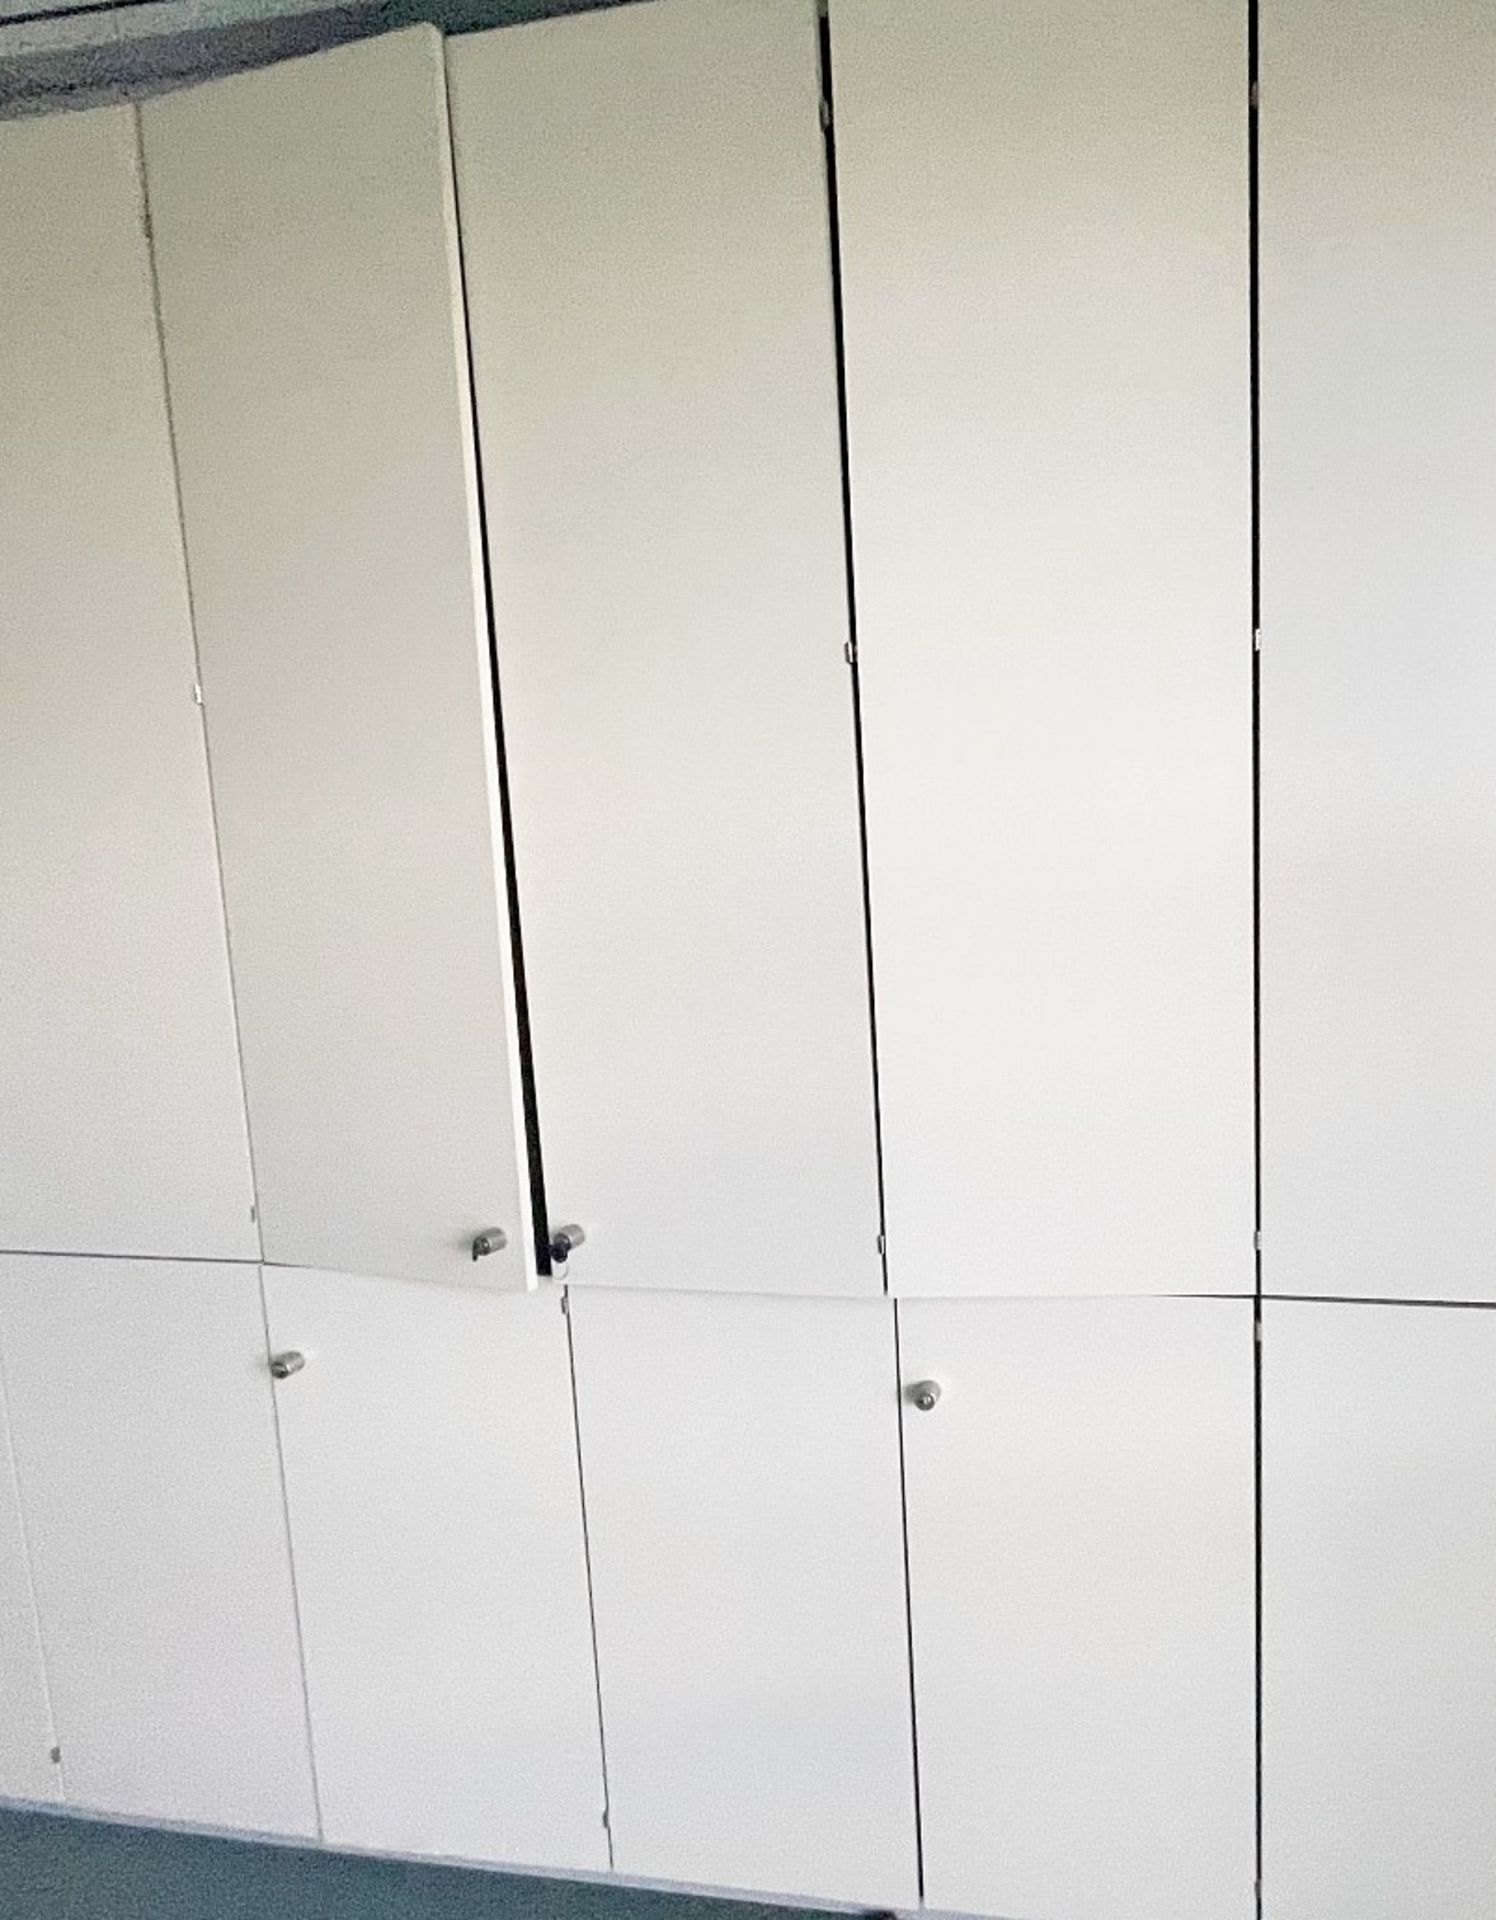 4.8 Metre Wide Bank Of Wall Storage Units - Ref: ED167C - To Be Removed From An Executive Office - Image 2 of 5